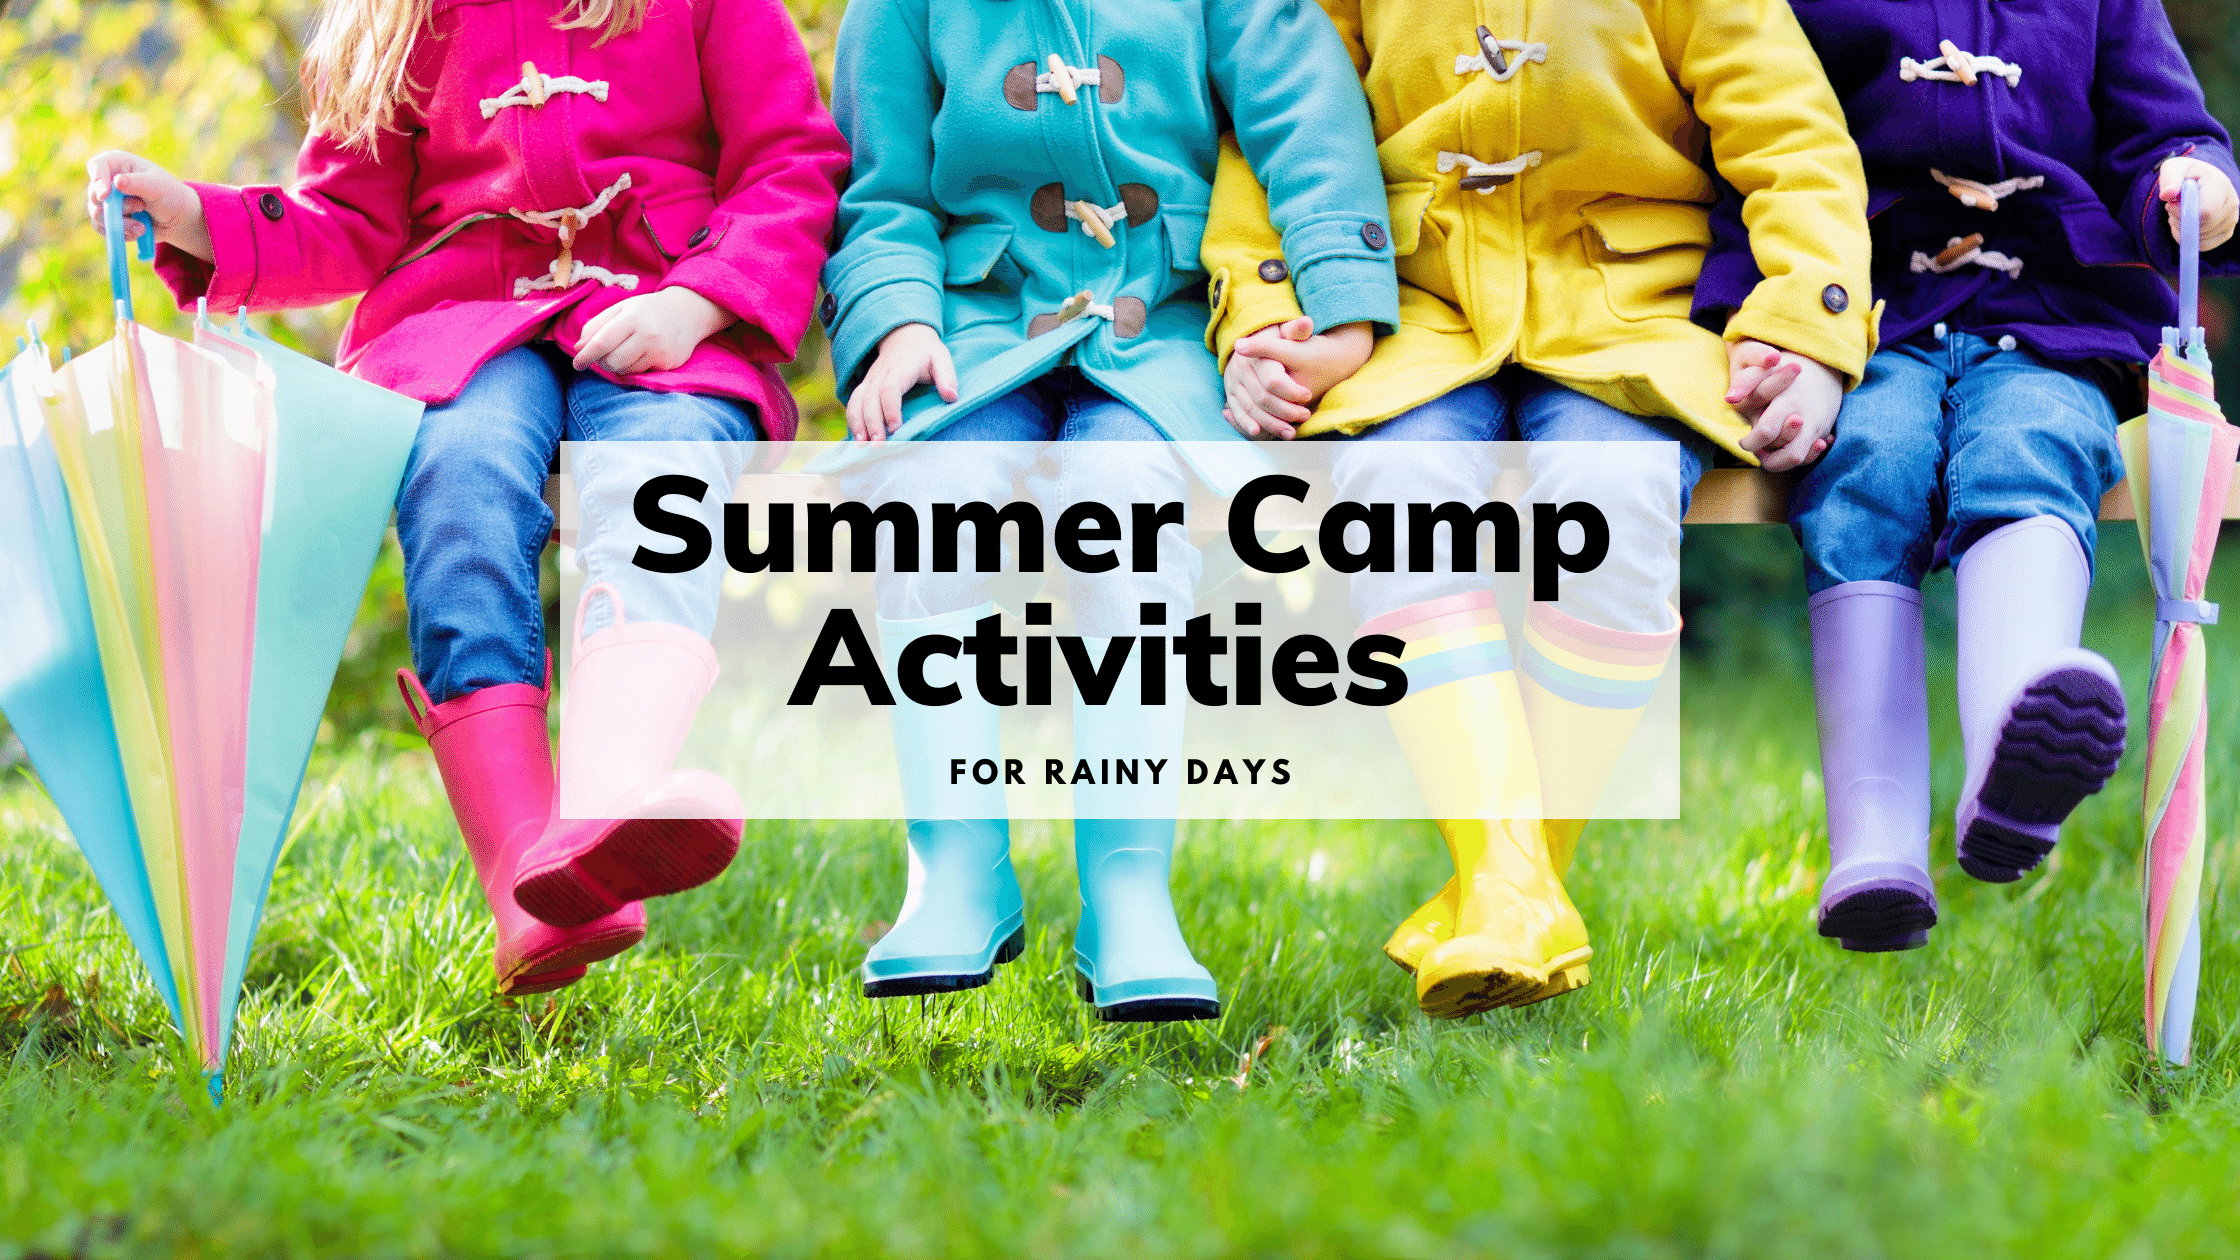 List of Fun Camp Games to Play All Summer Long at the Picnic Tables